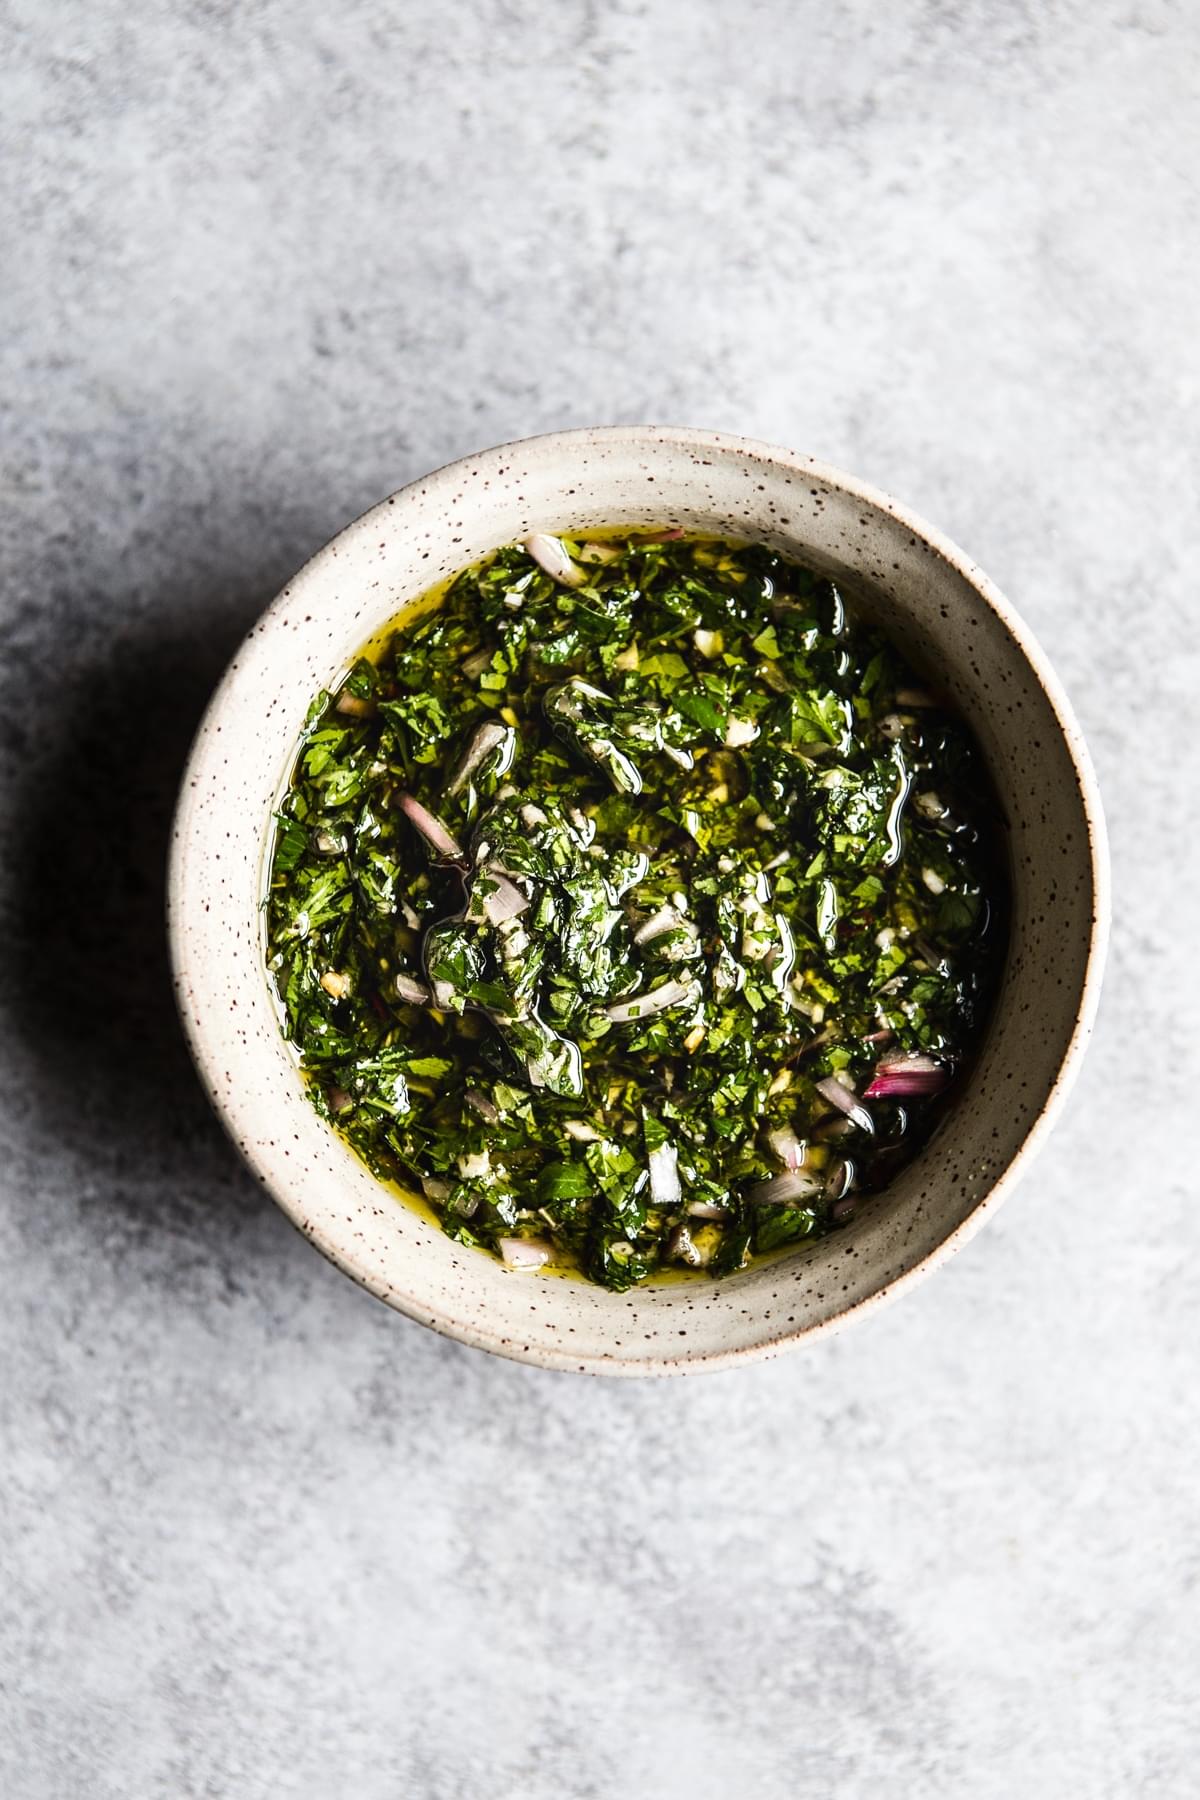 A small bowl of Chimichurri sauce